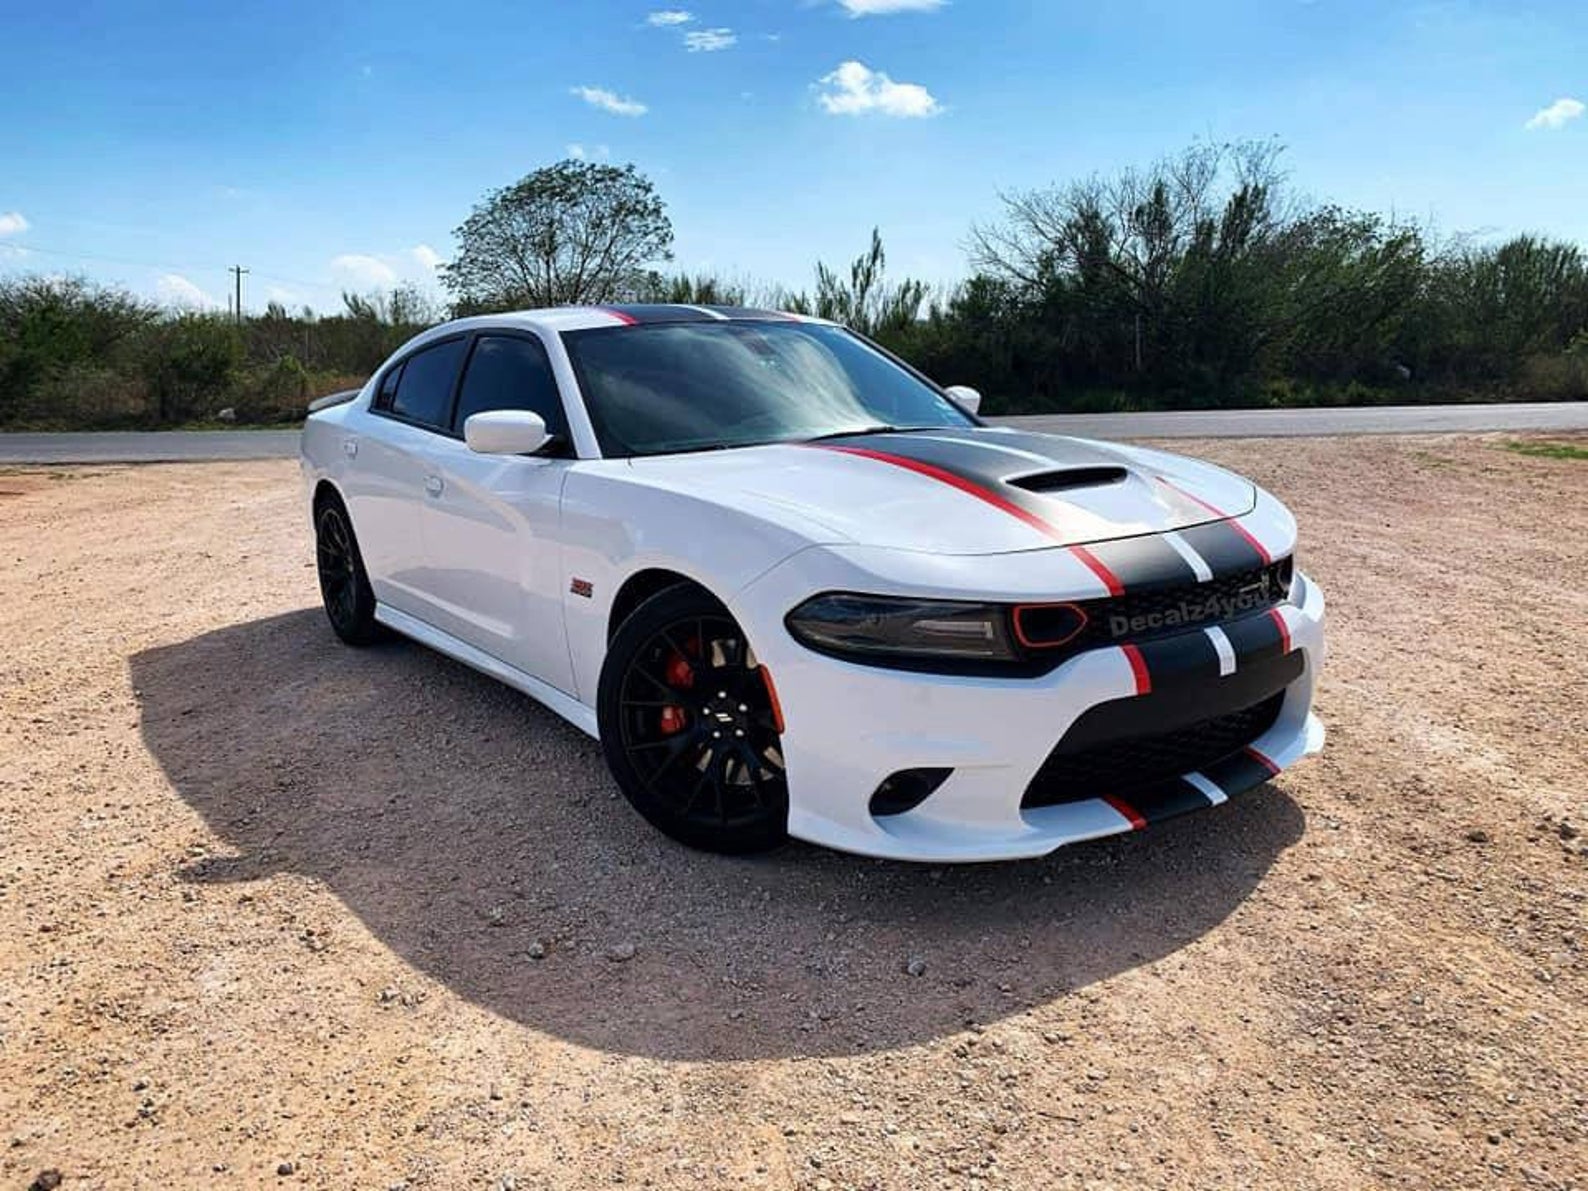 Dodge Charger Racing Stripes Full Body Kit Car Decals Decalz4you